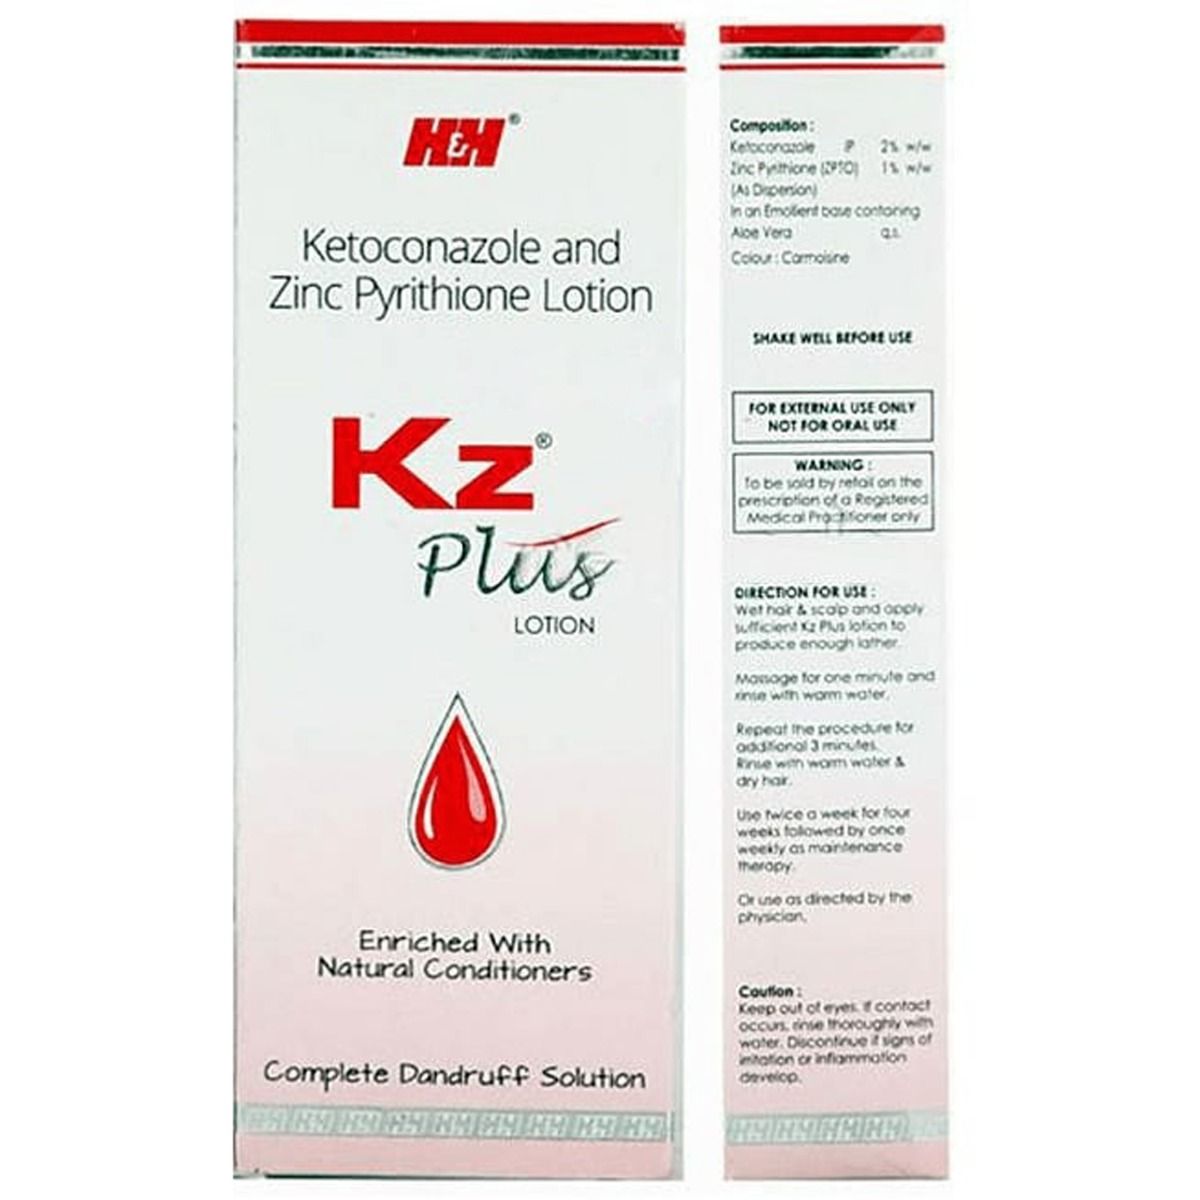 KZ Plus Lotion 75 ml Price, Uses, Side Effects, Composition - Apollo  Pharmacy